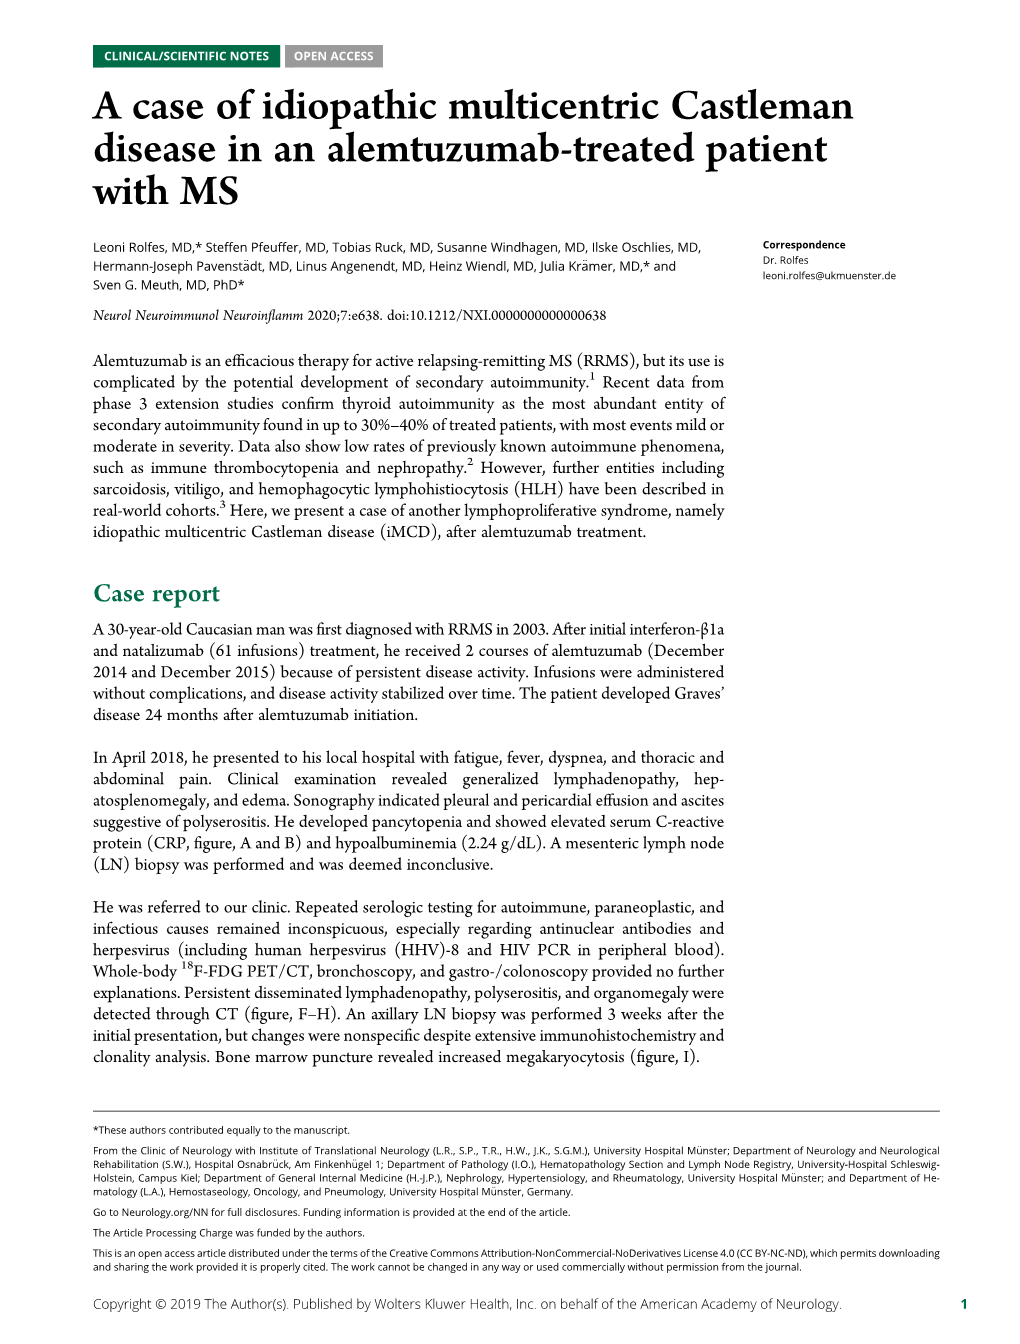 A Case of Idiopathic Multicentric Castleman Disease in an Alemtuzumab-Treated Patient with MS